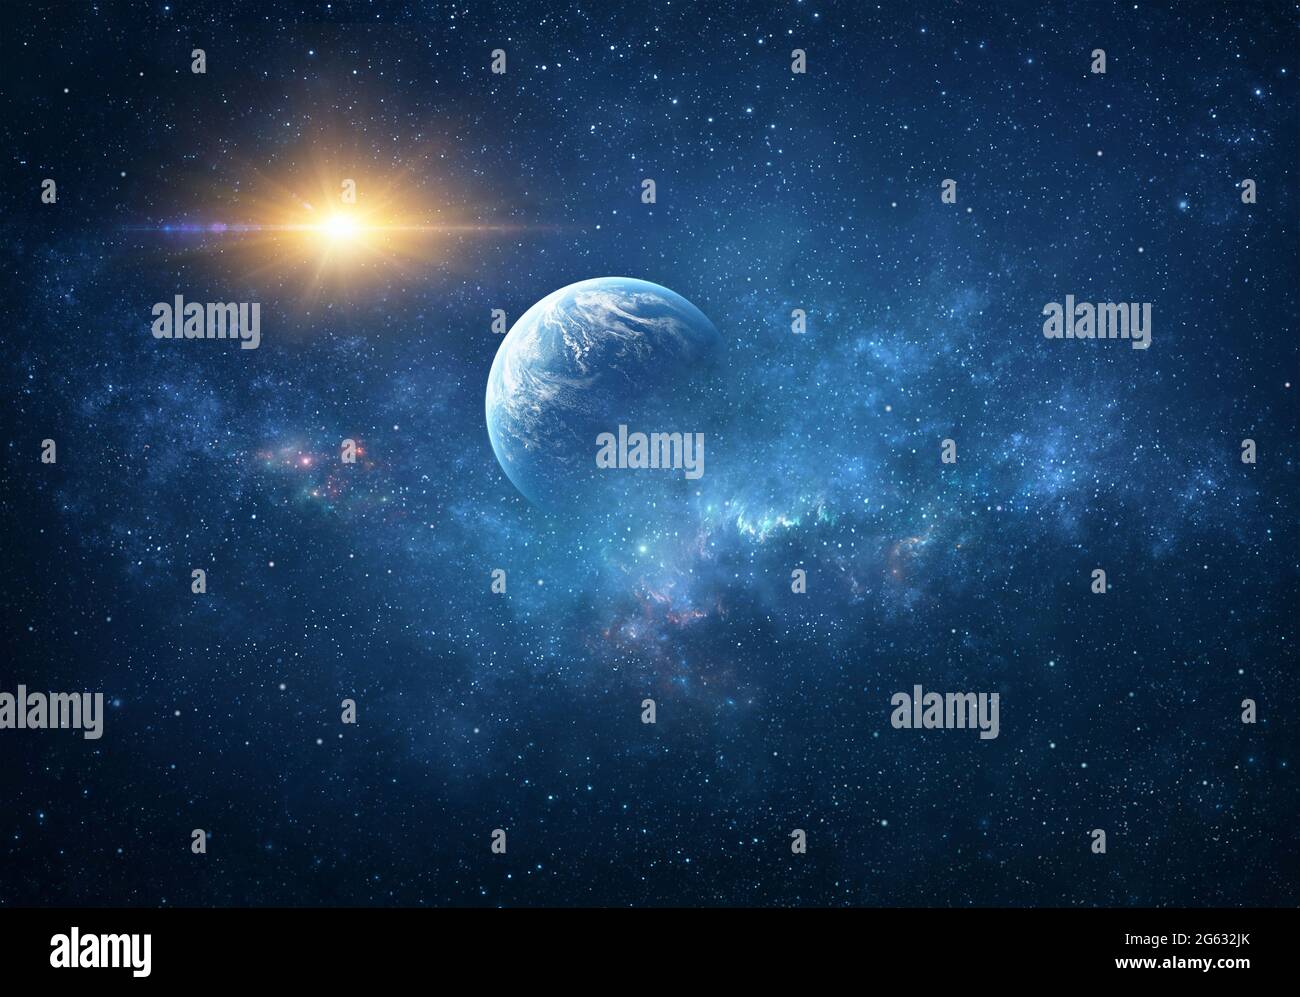 Planet behind star clusters and nebulas, sun shining in outer space. Fragment of Universe. Stock Photo